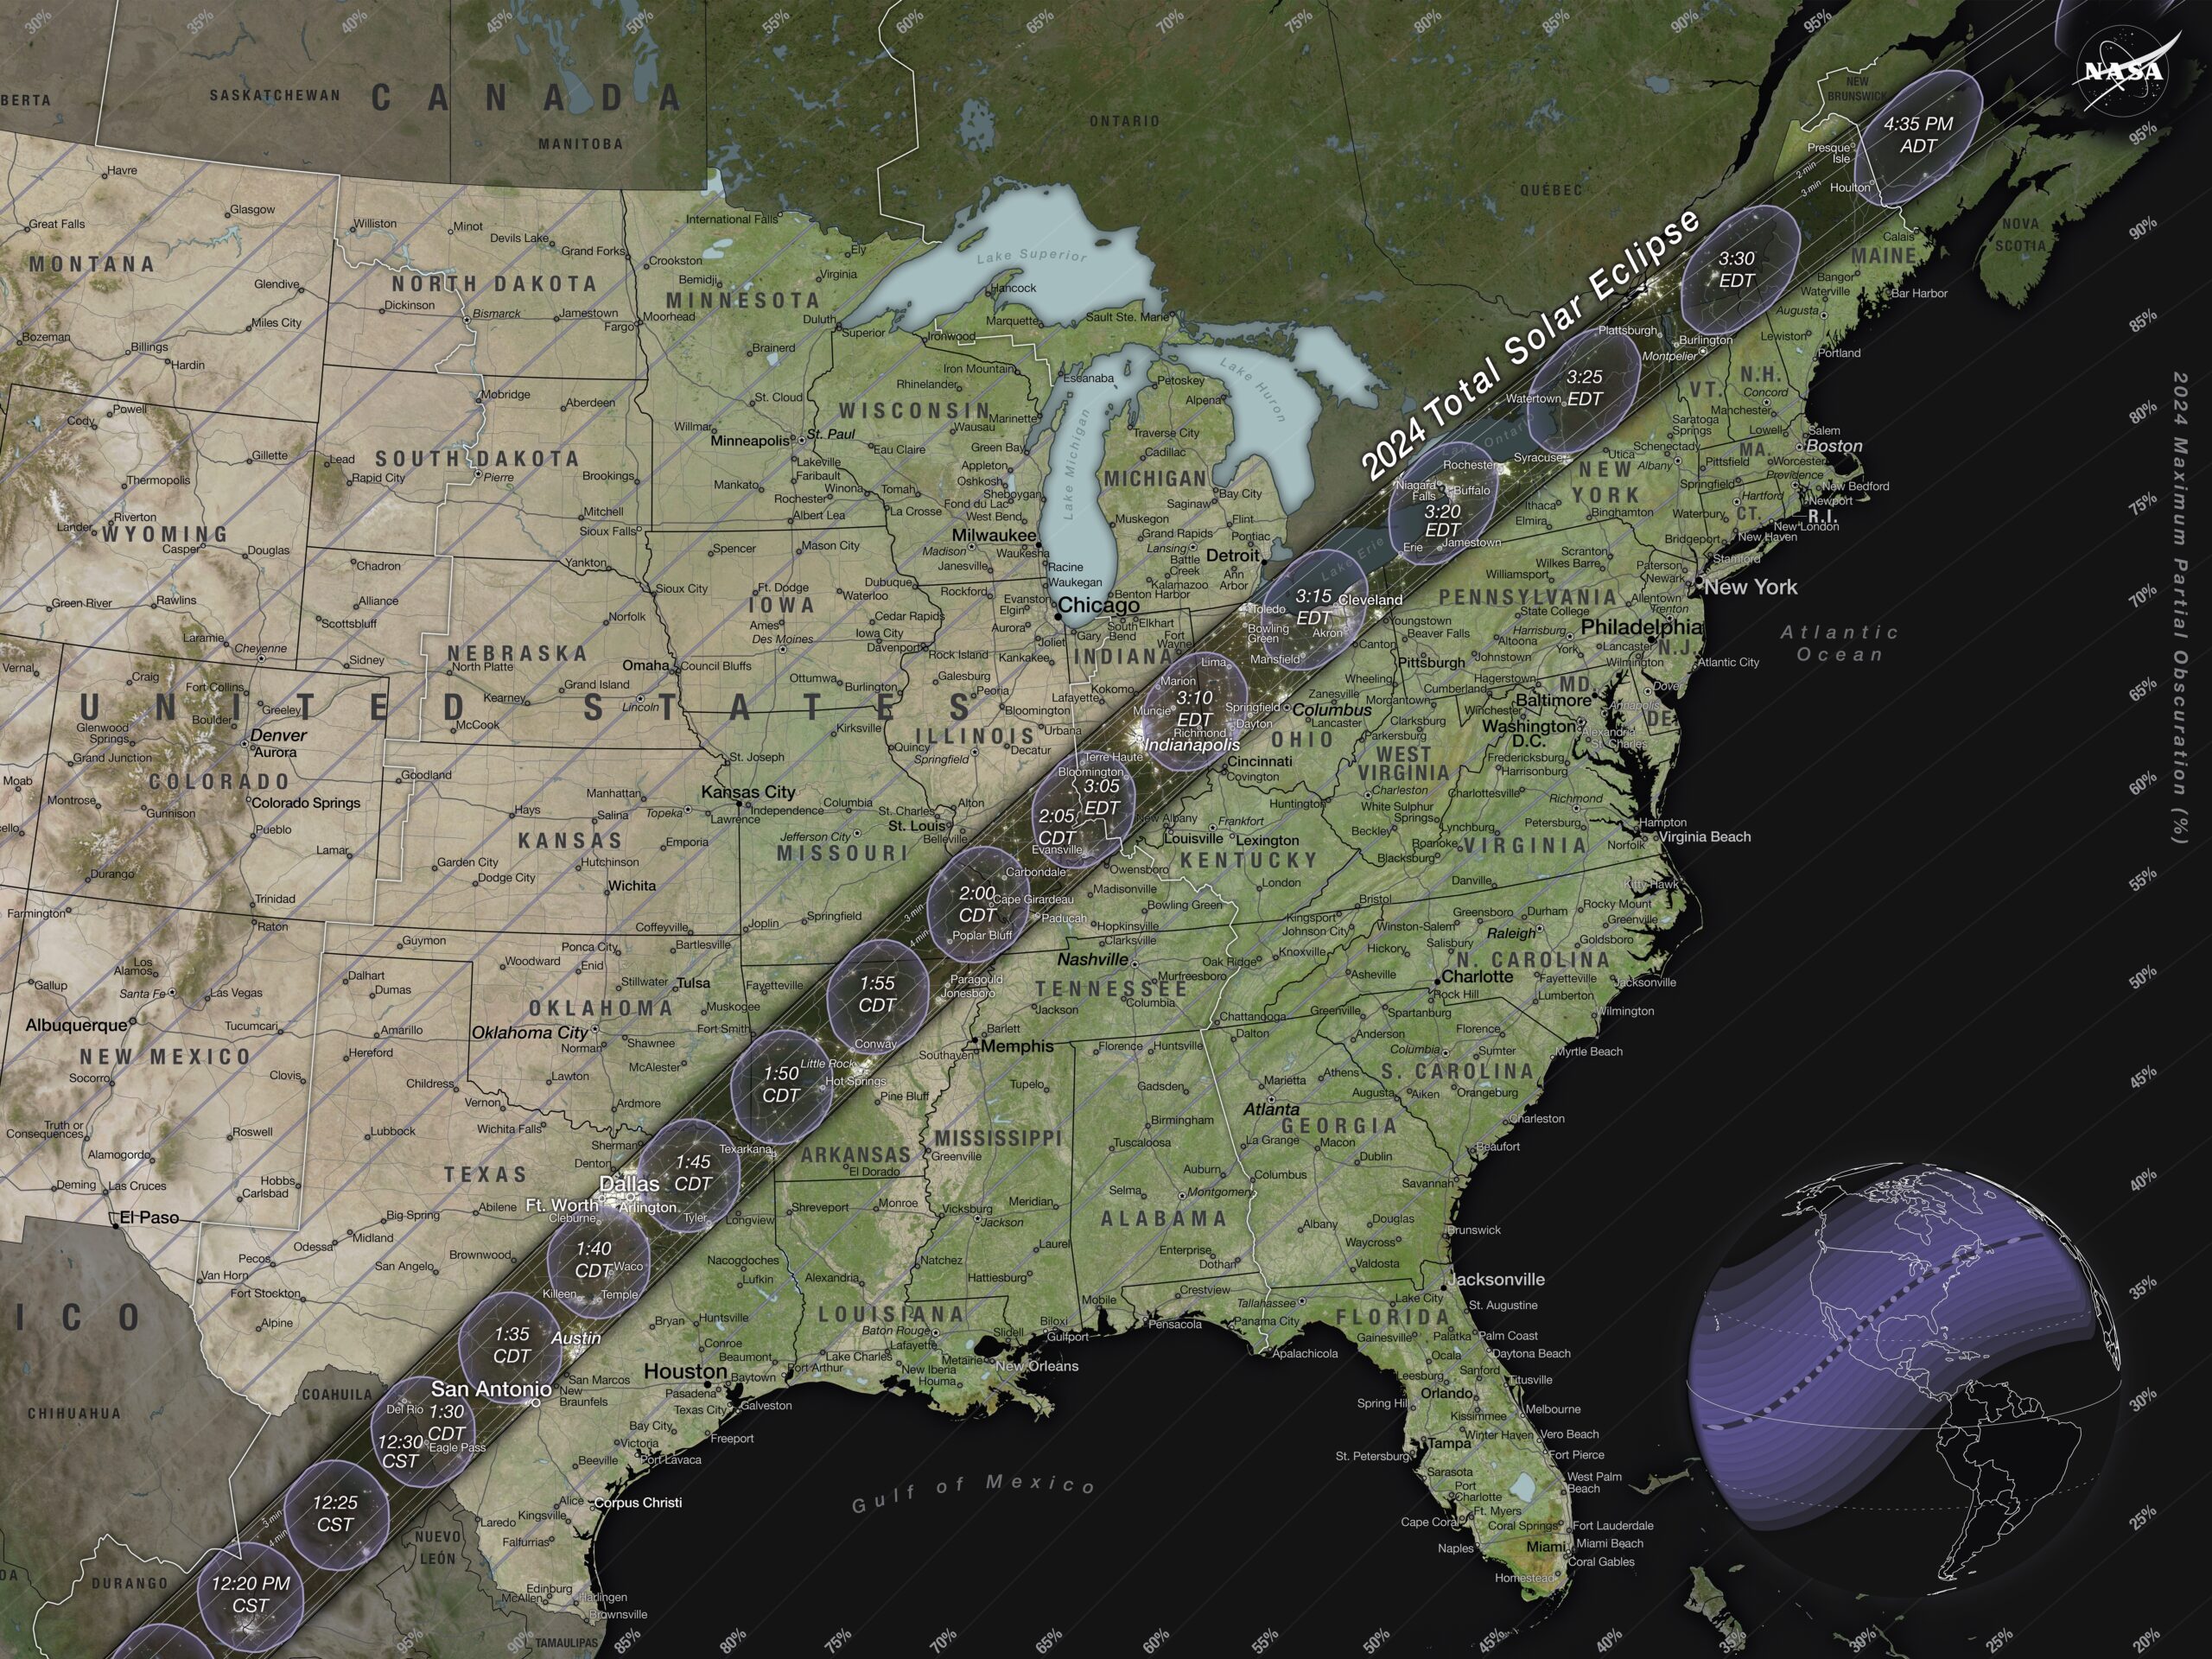 eclipse_map_2024_notext_10800-fca5ff1be383354dea30f54bfcf48fb4435c8052-scaled.jpg